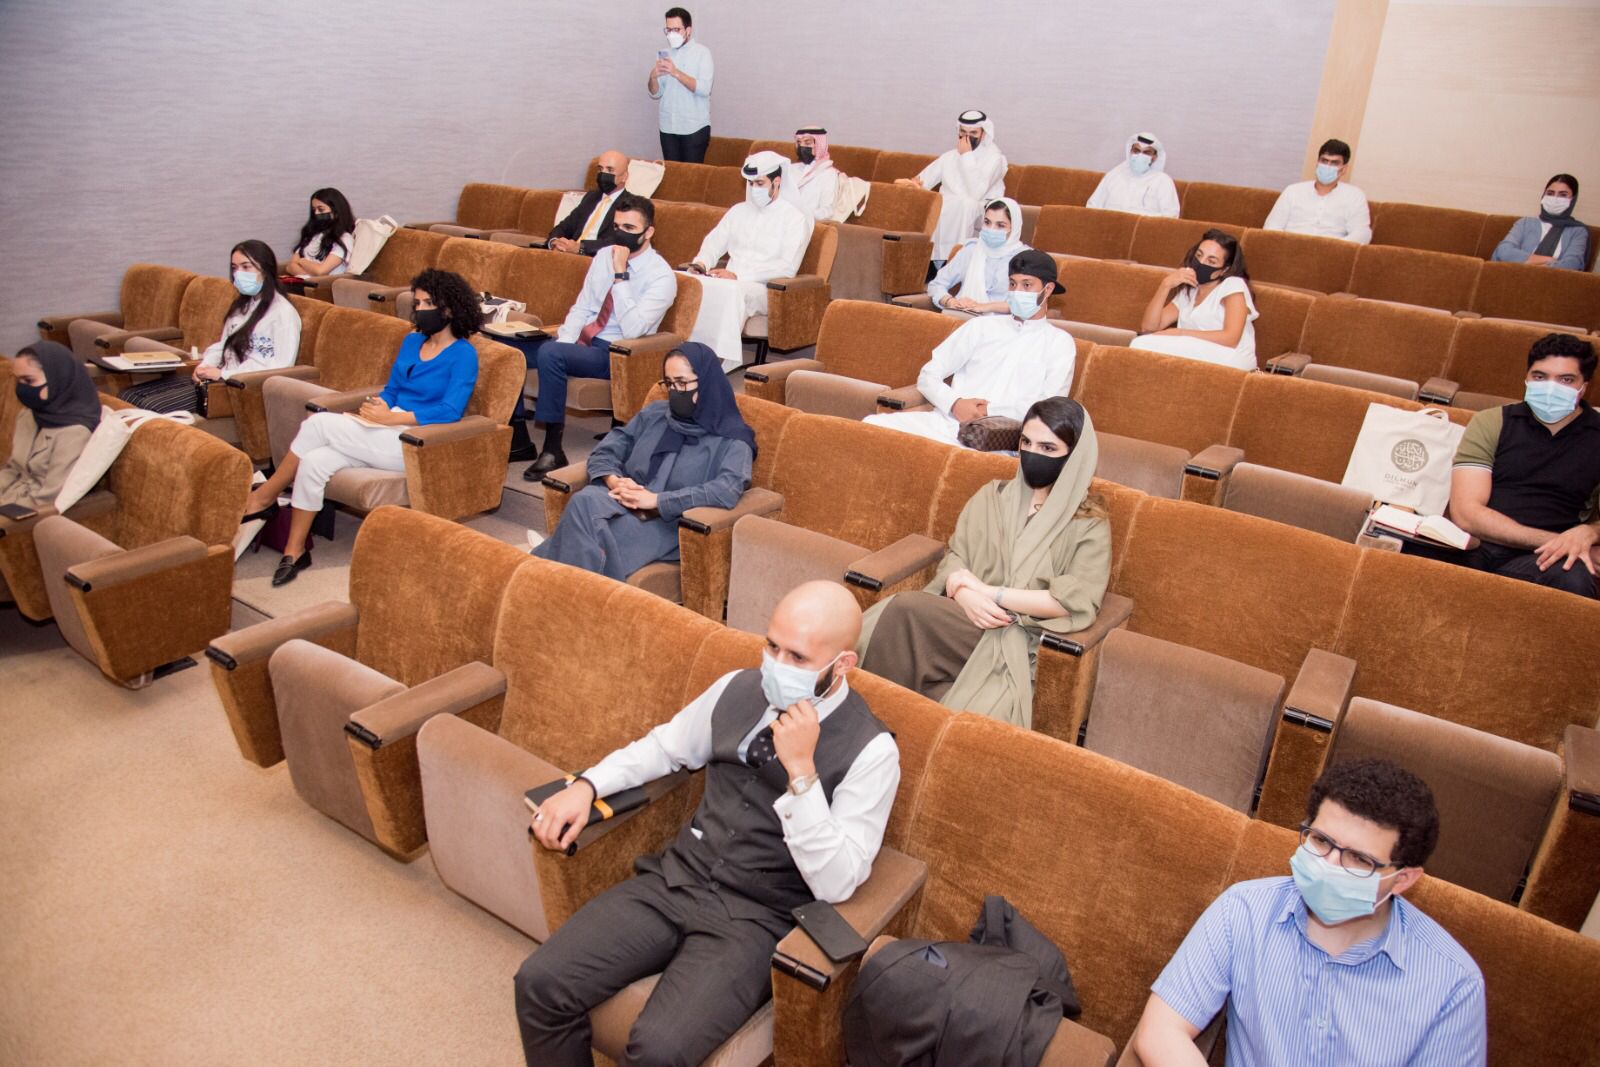 BACA launches a training programme for the volunteers taking part in the Bahrain pavilion at the Expo 2020 Dubai